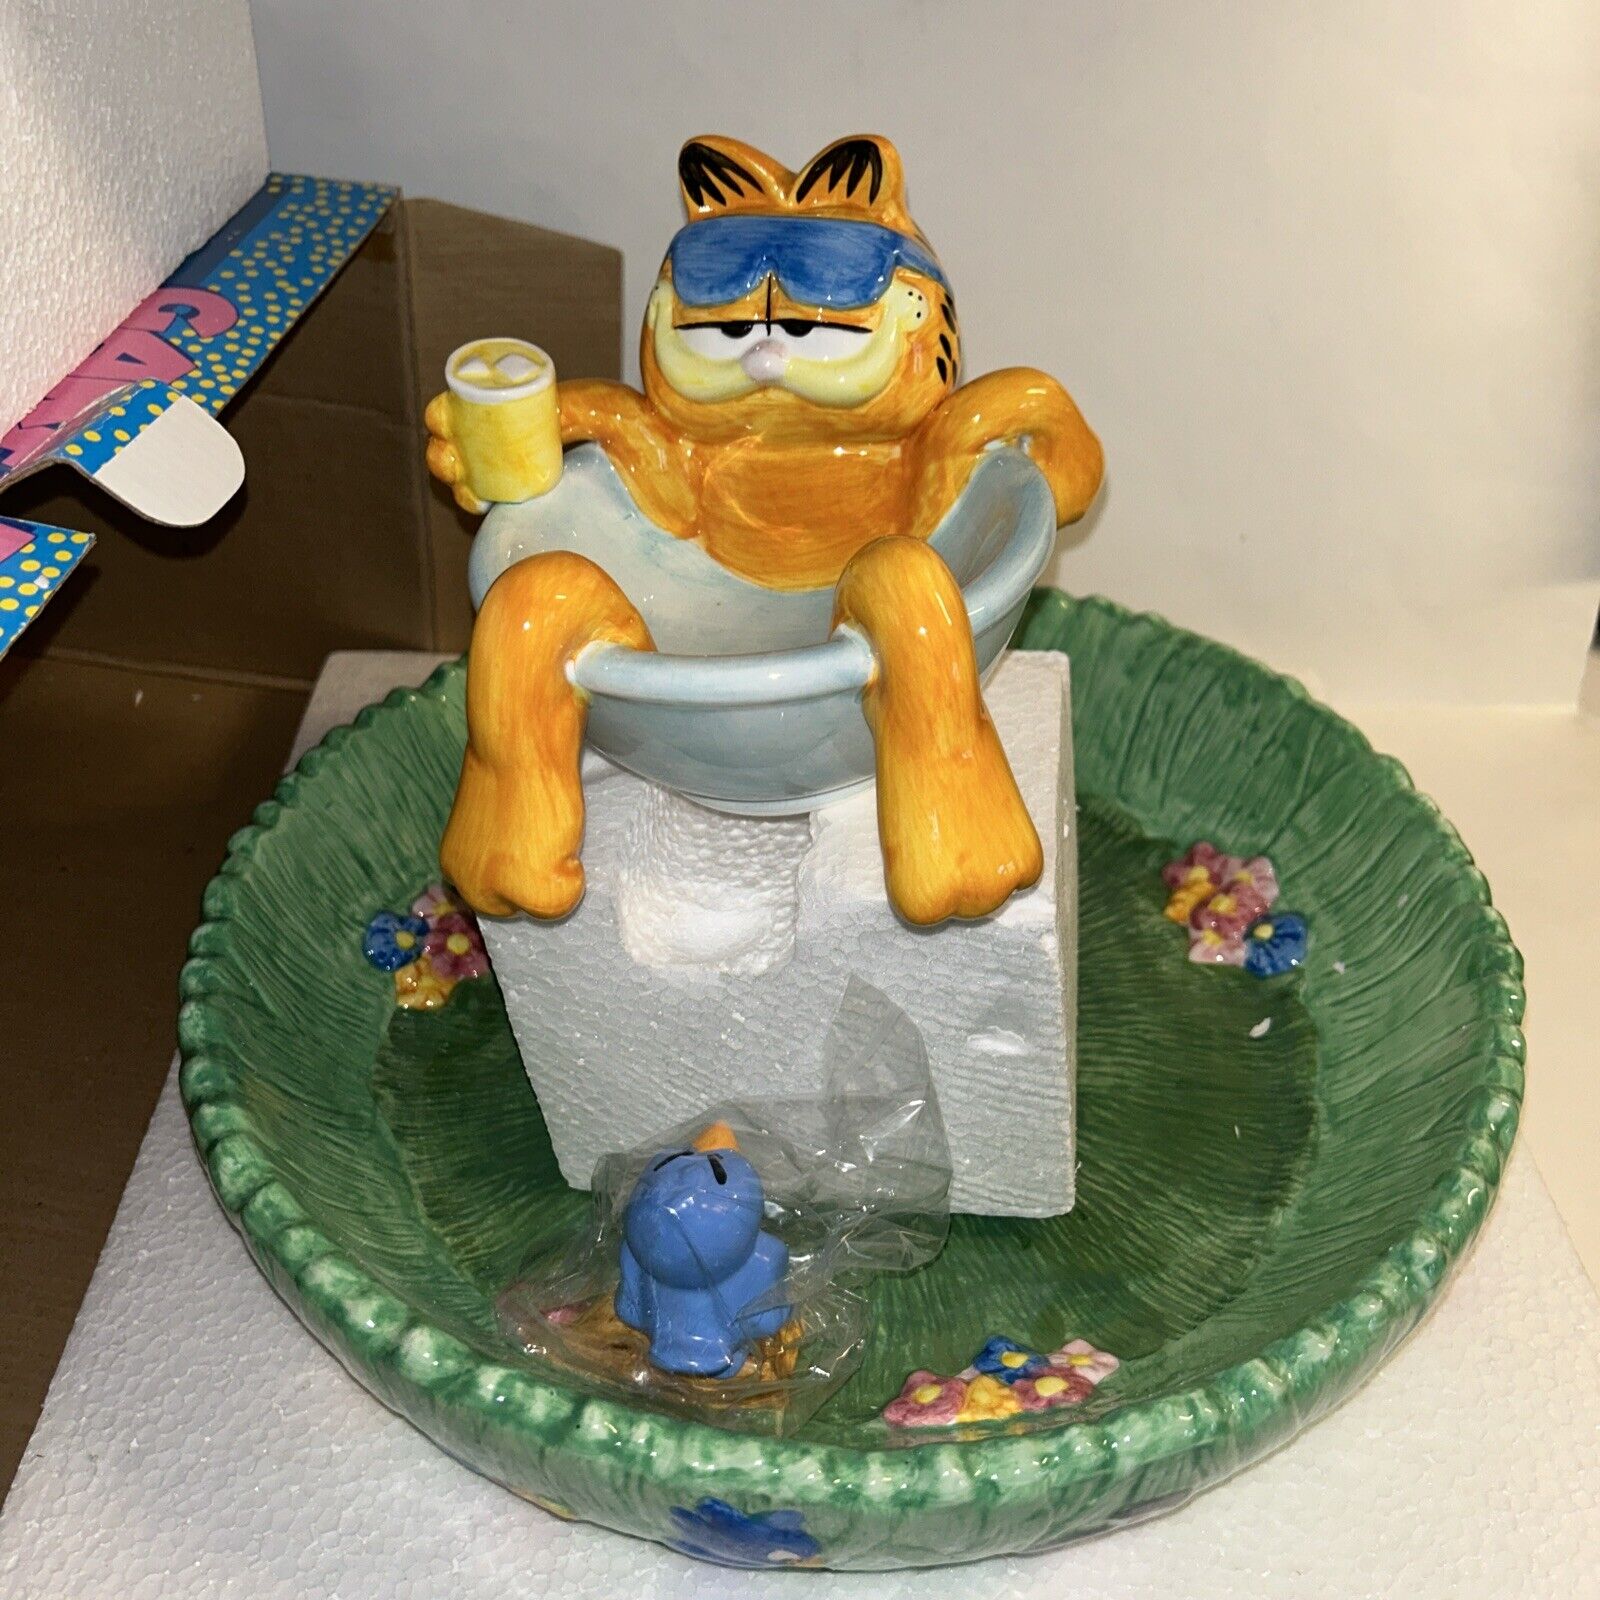 EXTREMELY RARE Garfield Chip And Dip New In Box